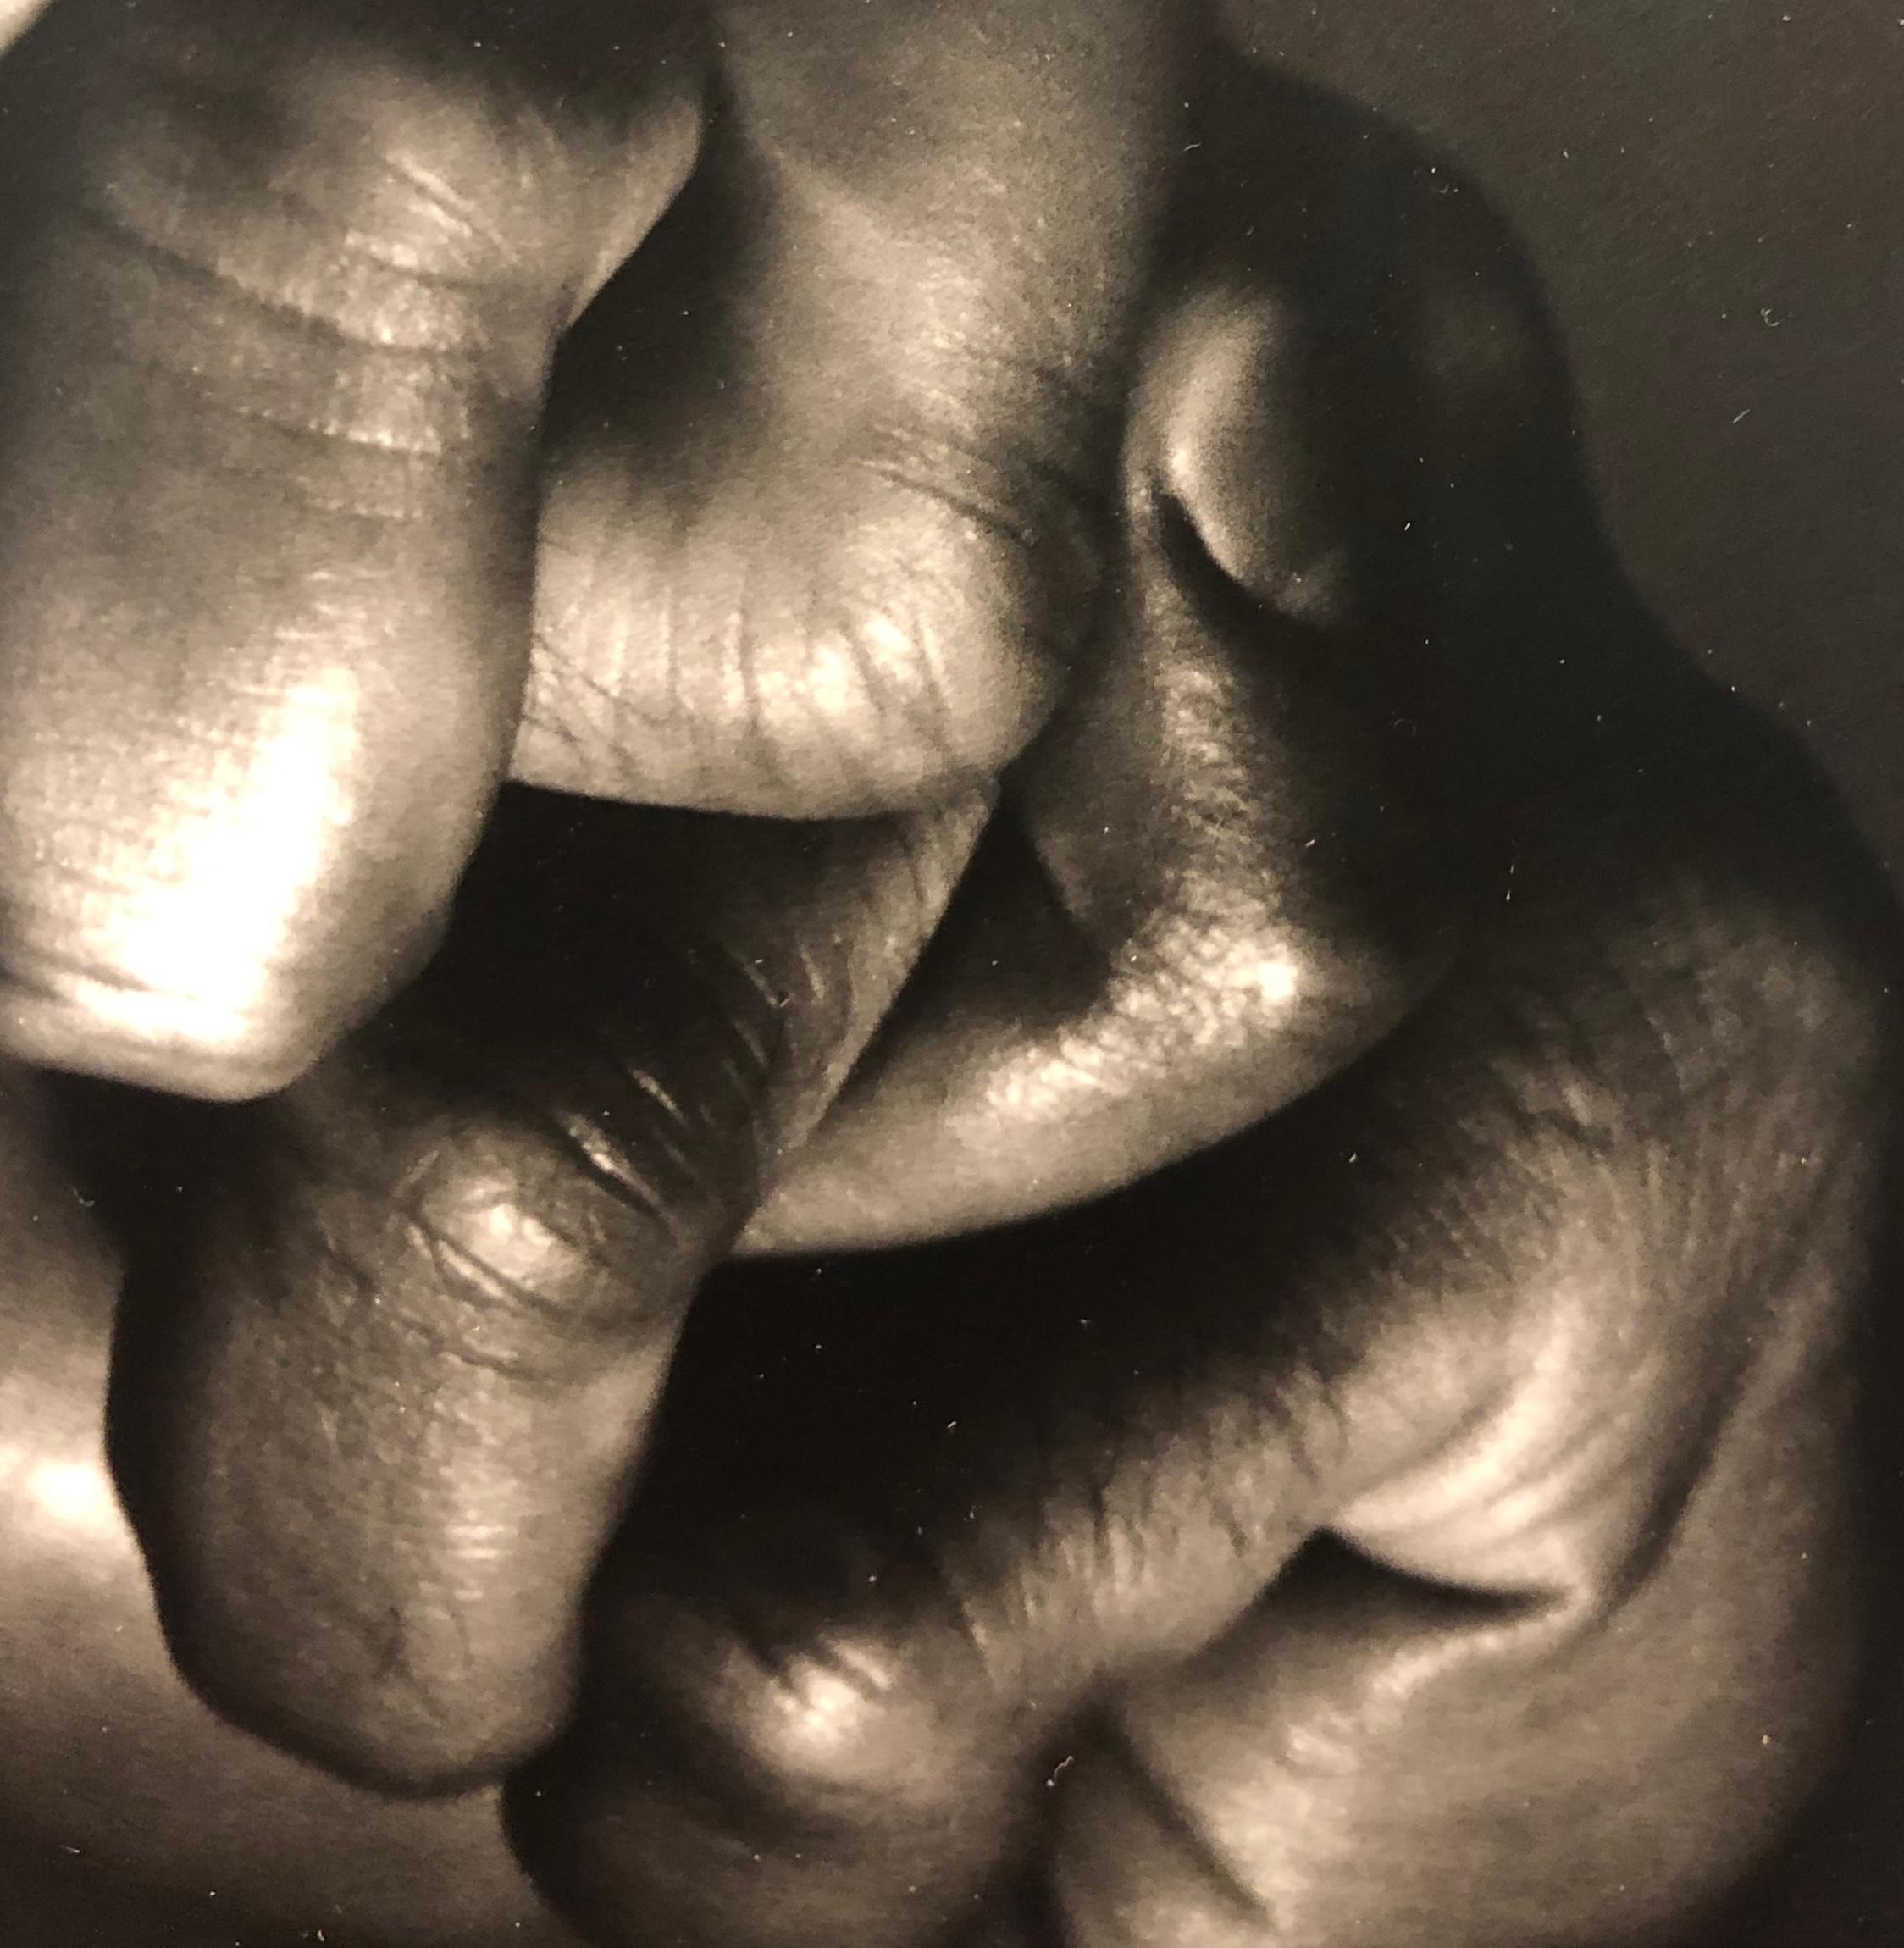 Hands Together - Intertwined Hands, Silver Gelatin Print, Matted and Framed - Contemporary Photograph by Doug Birkenheuer